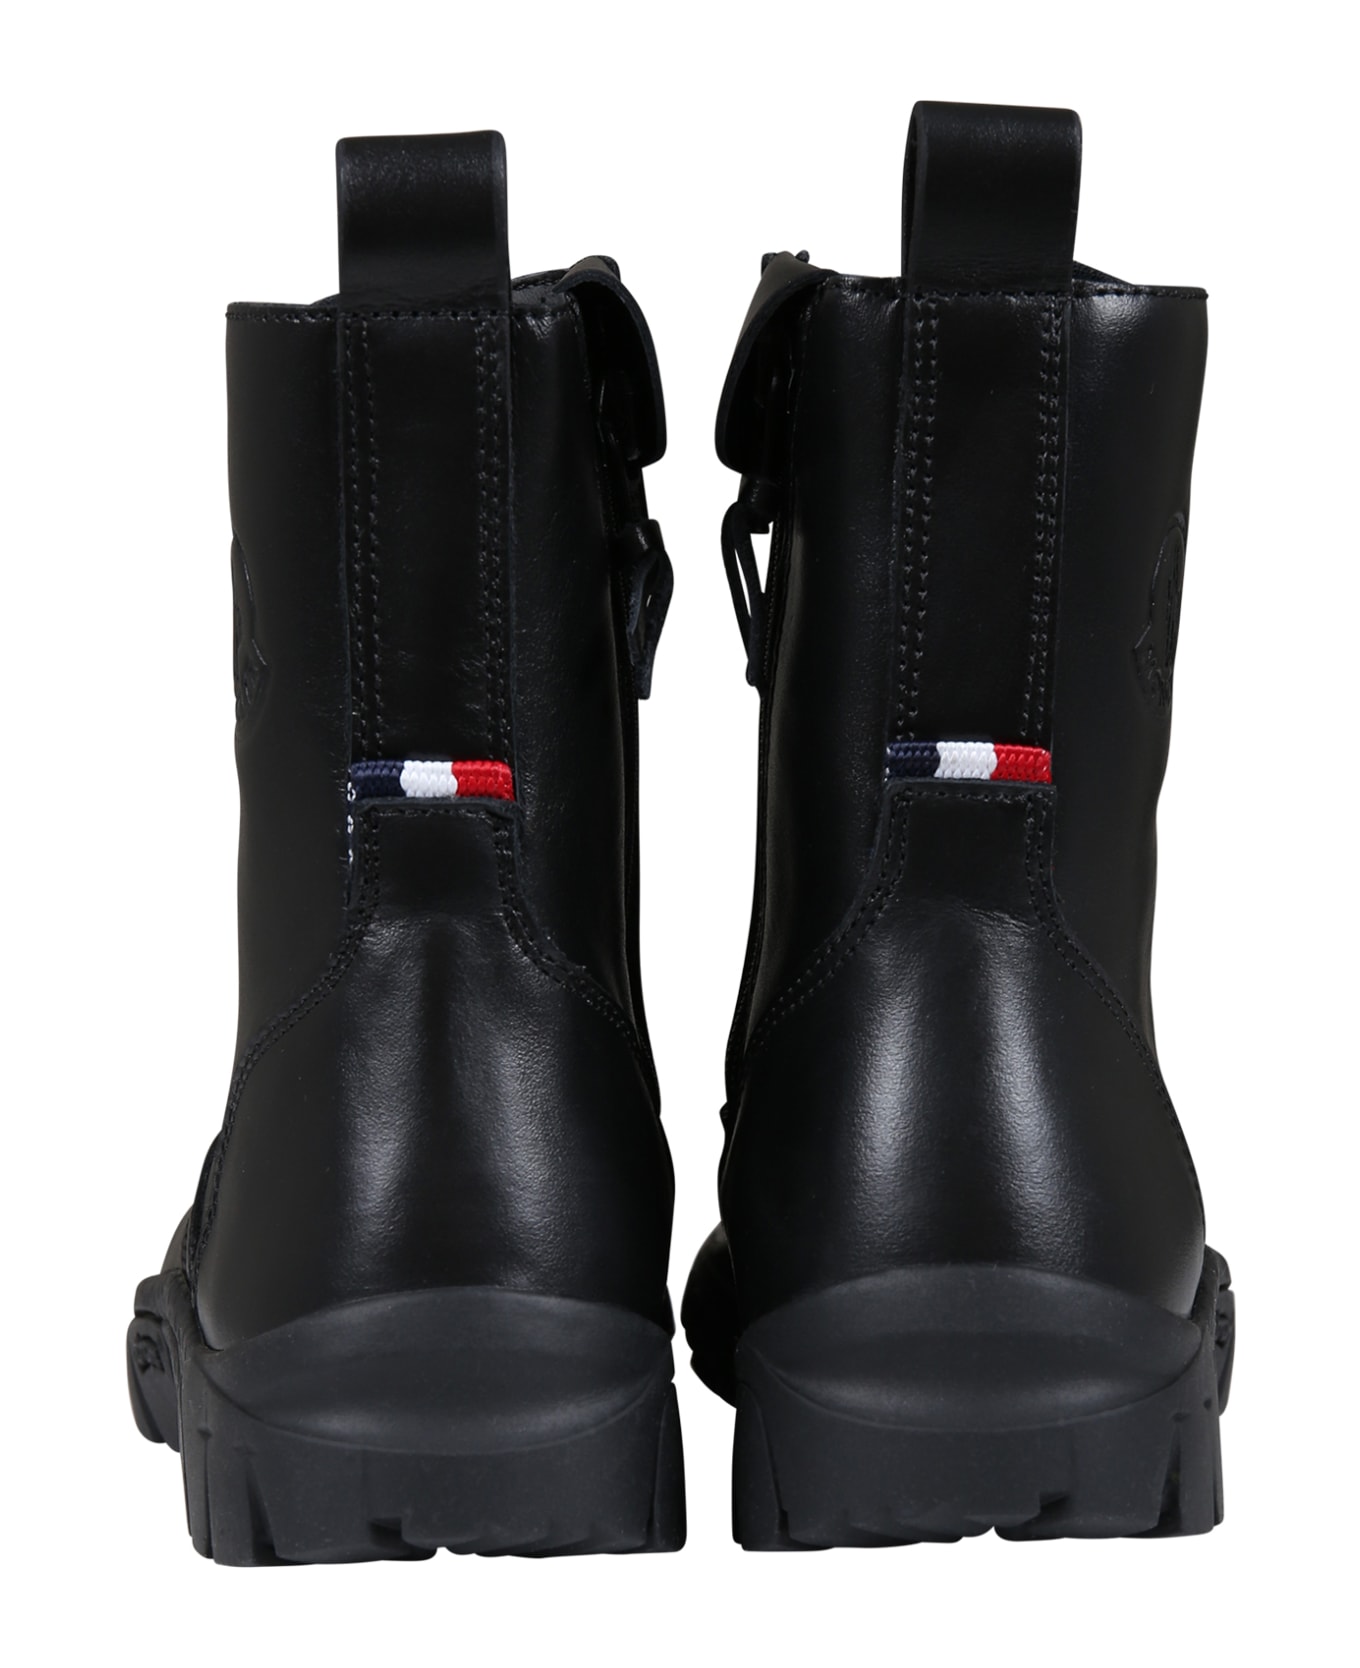 Moncler Black Combat Boots For Kids With Logo シューズ